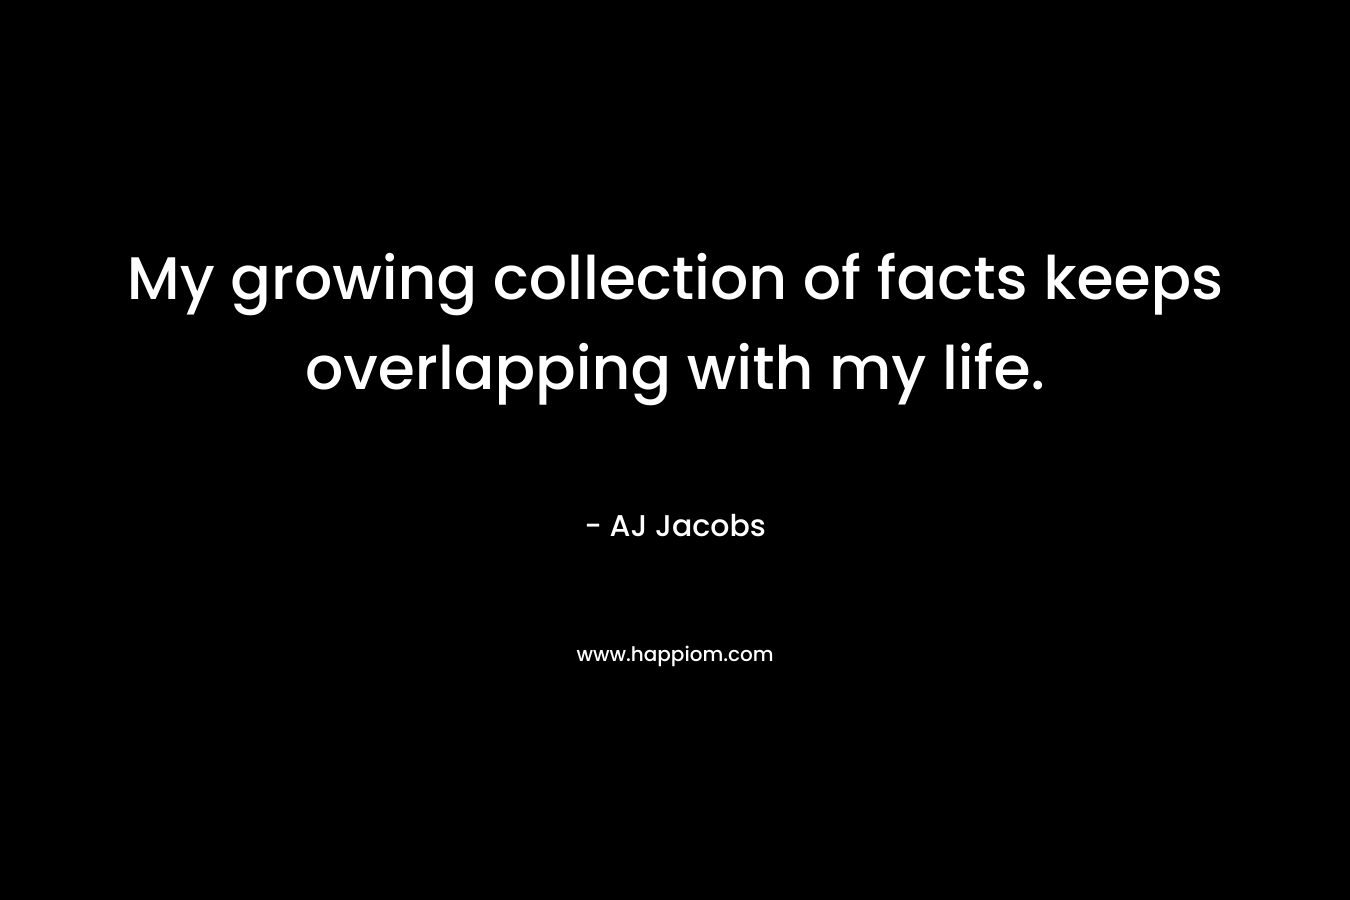 My growing collection of facts keeps overlapping with my life. – AJ Jacobs